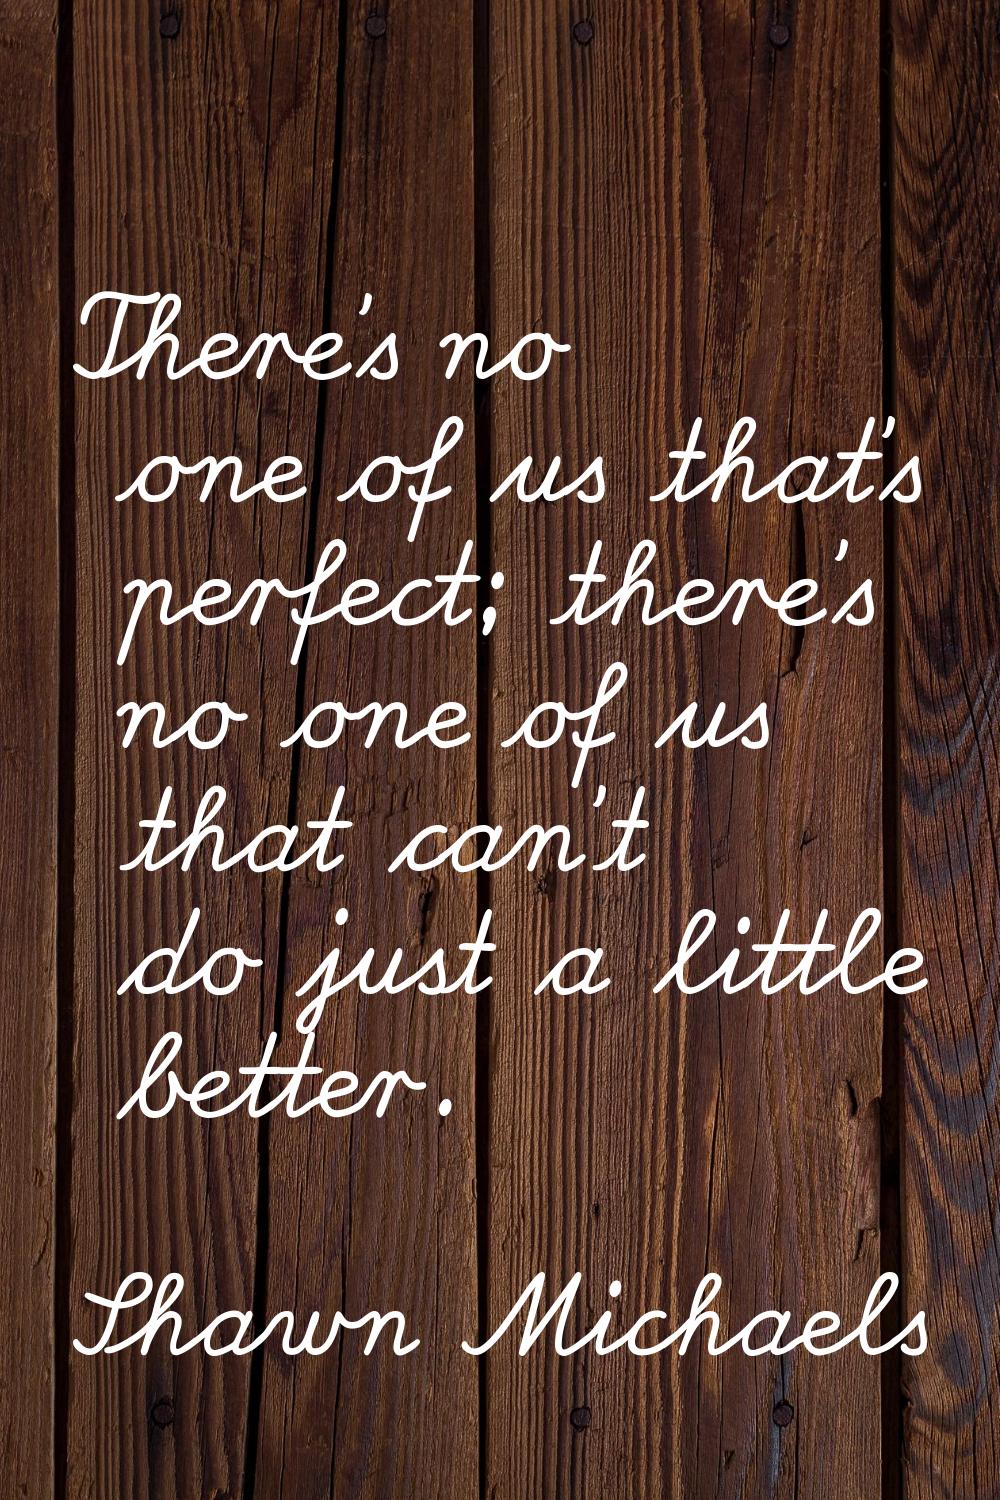 There's no one of us that's perfect; there's no one of us that can't do just a little better.